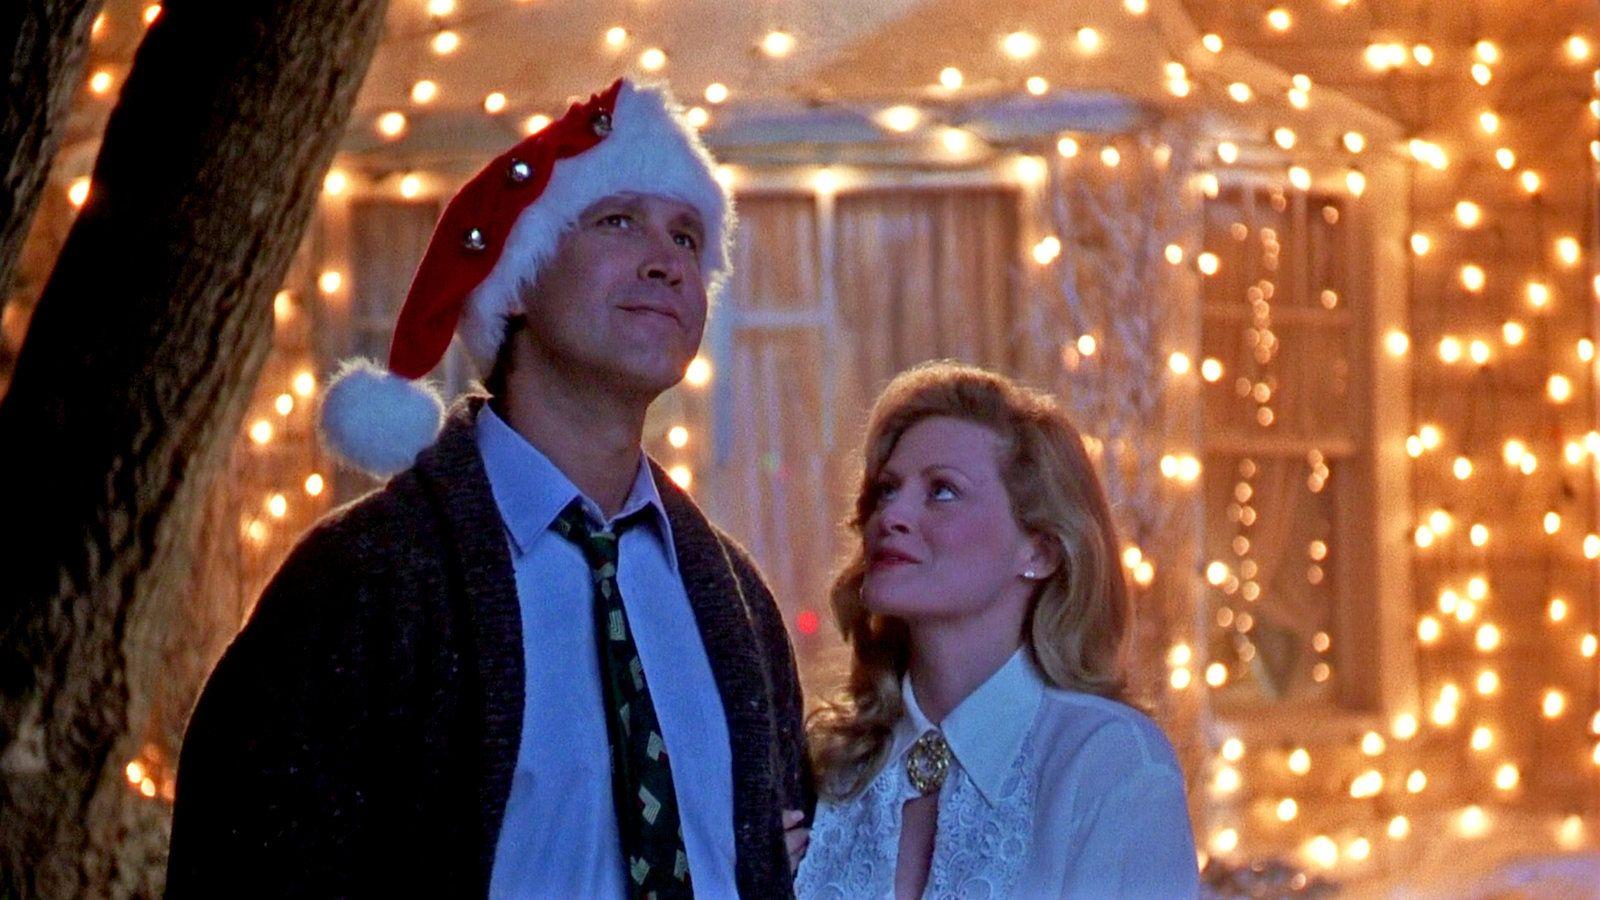 National Lampoon's Christmas Vacation.